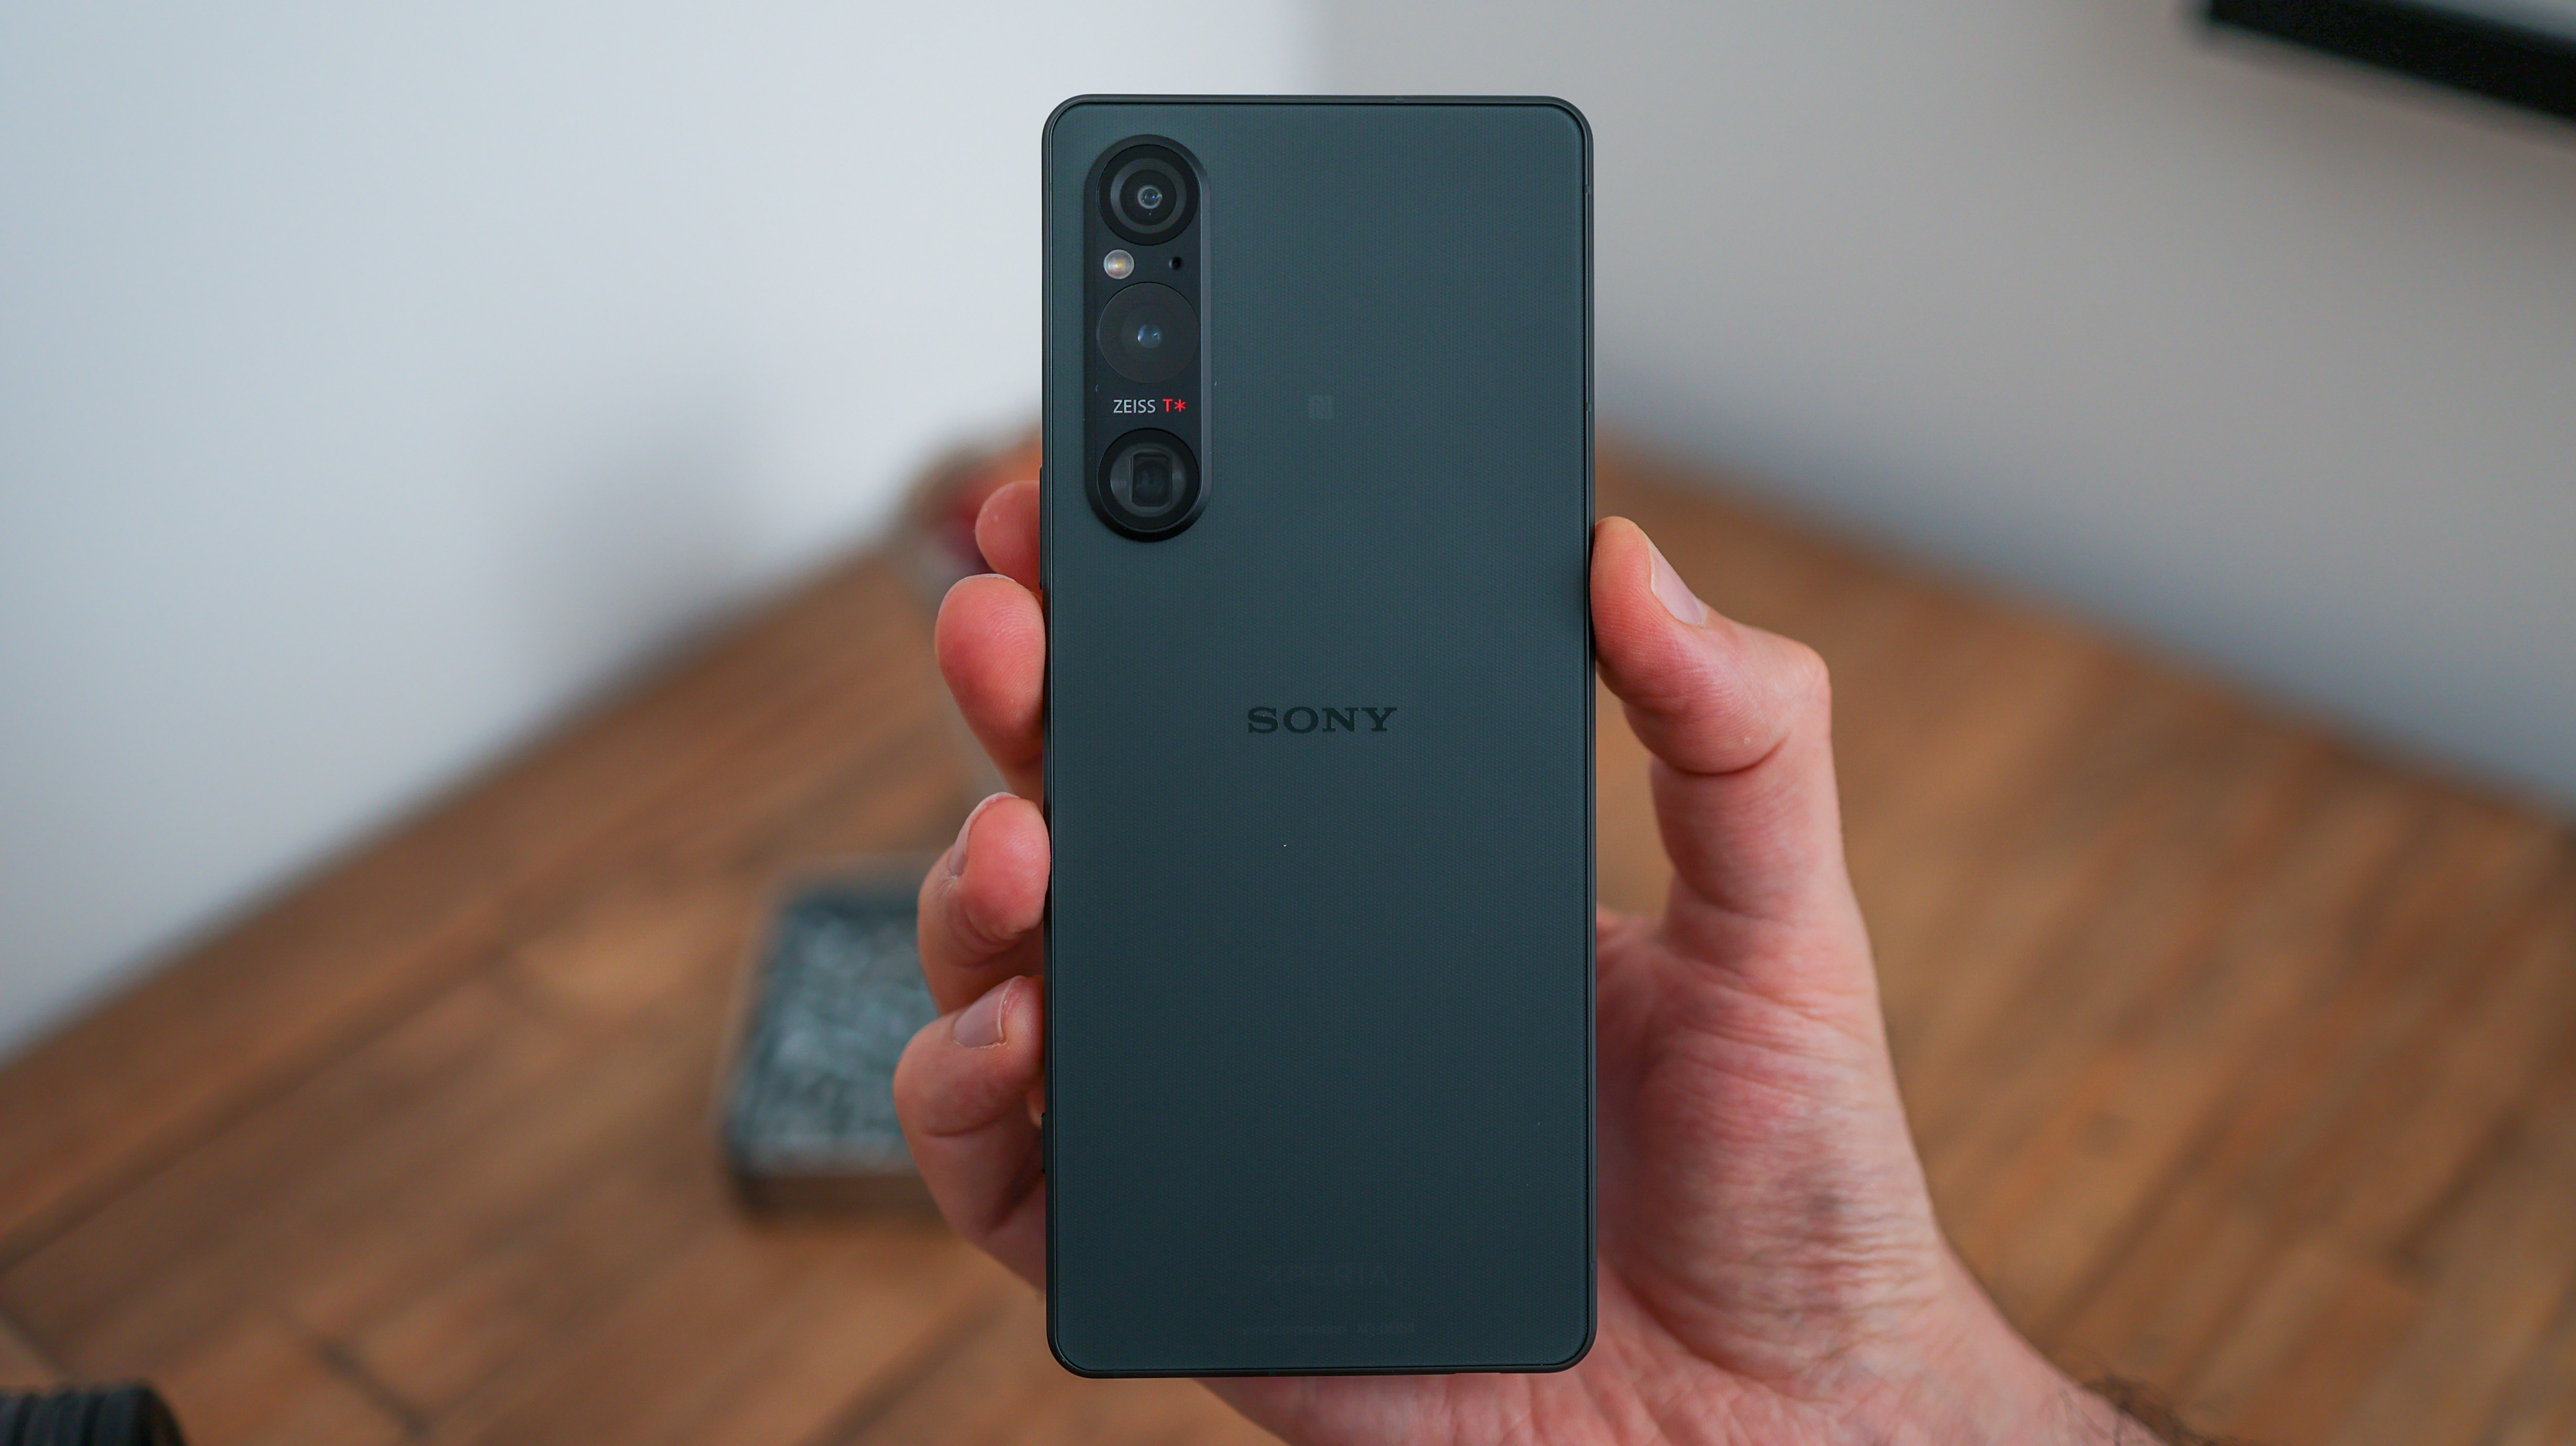 Sony Xperia 5 V review: Compact smartphone with a long battery life